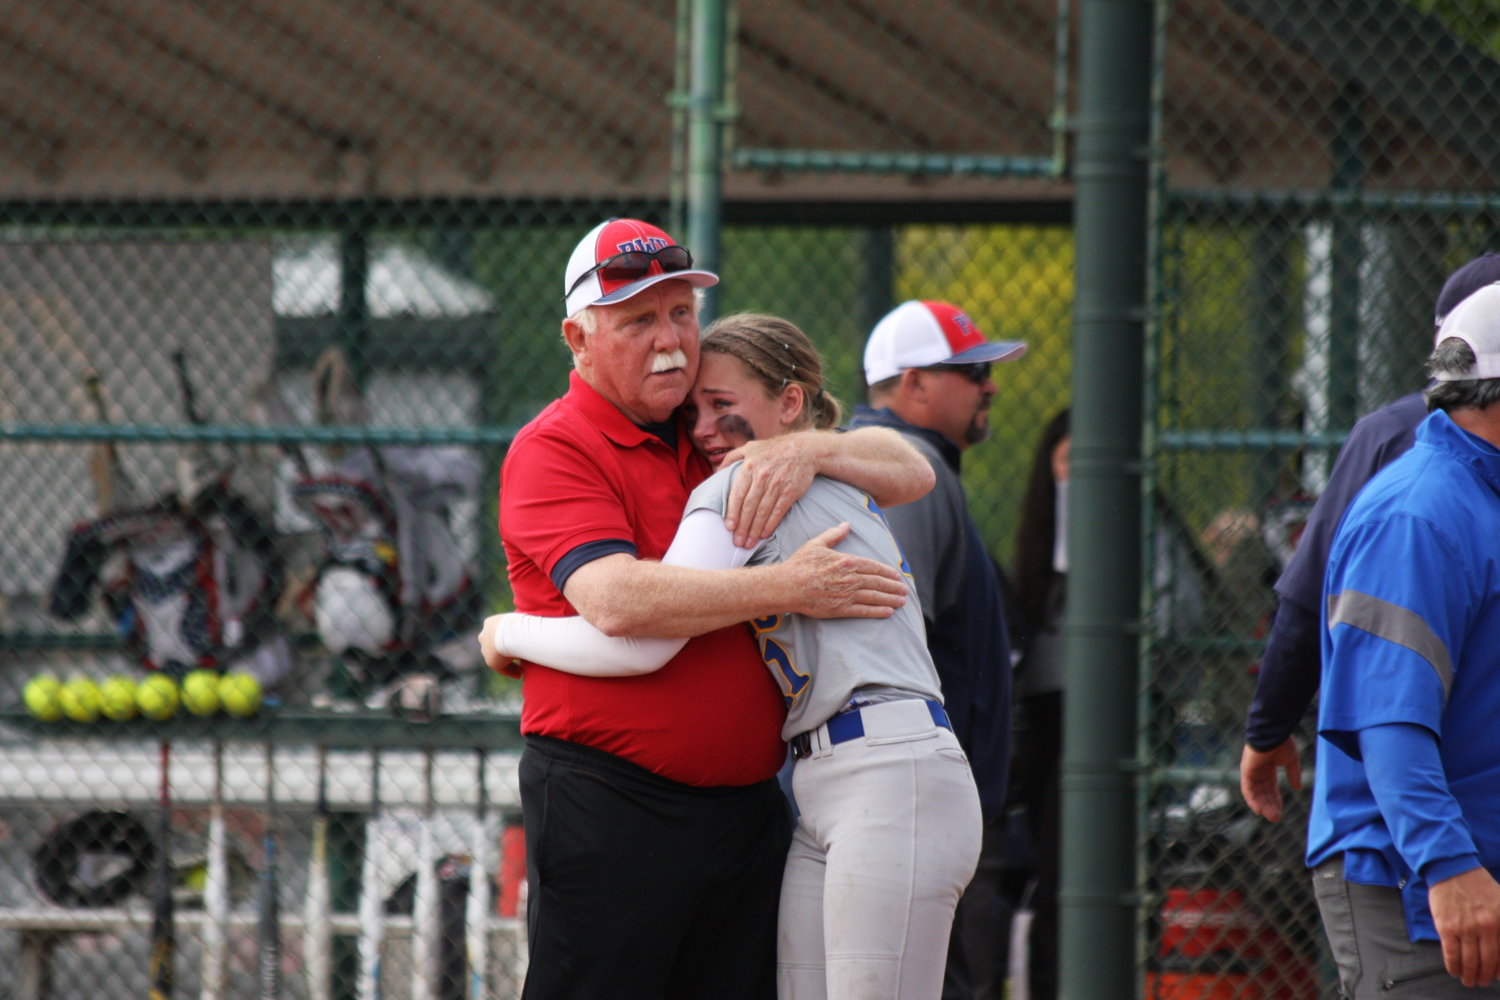 Pe Ell-Willapa Valley fastpitch coach Ken Olson comforts his granddaughter Danika Hallom, who plays centerfield for Adna, after PWV defeated Adna for the title. Olson recently announced this would be his final season after a long and successful coaching career.